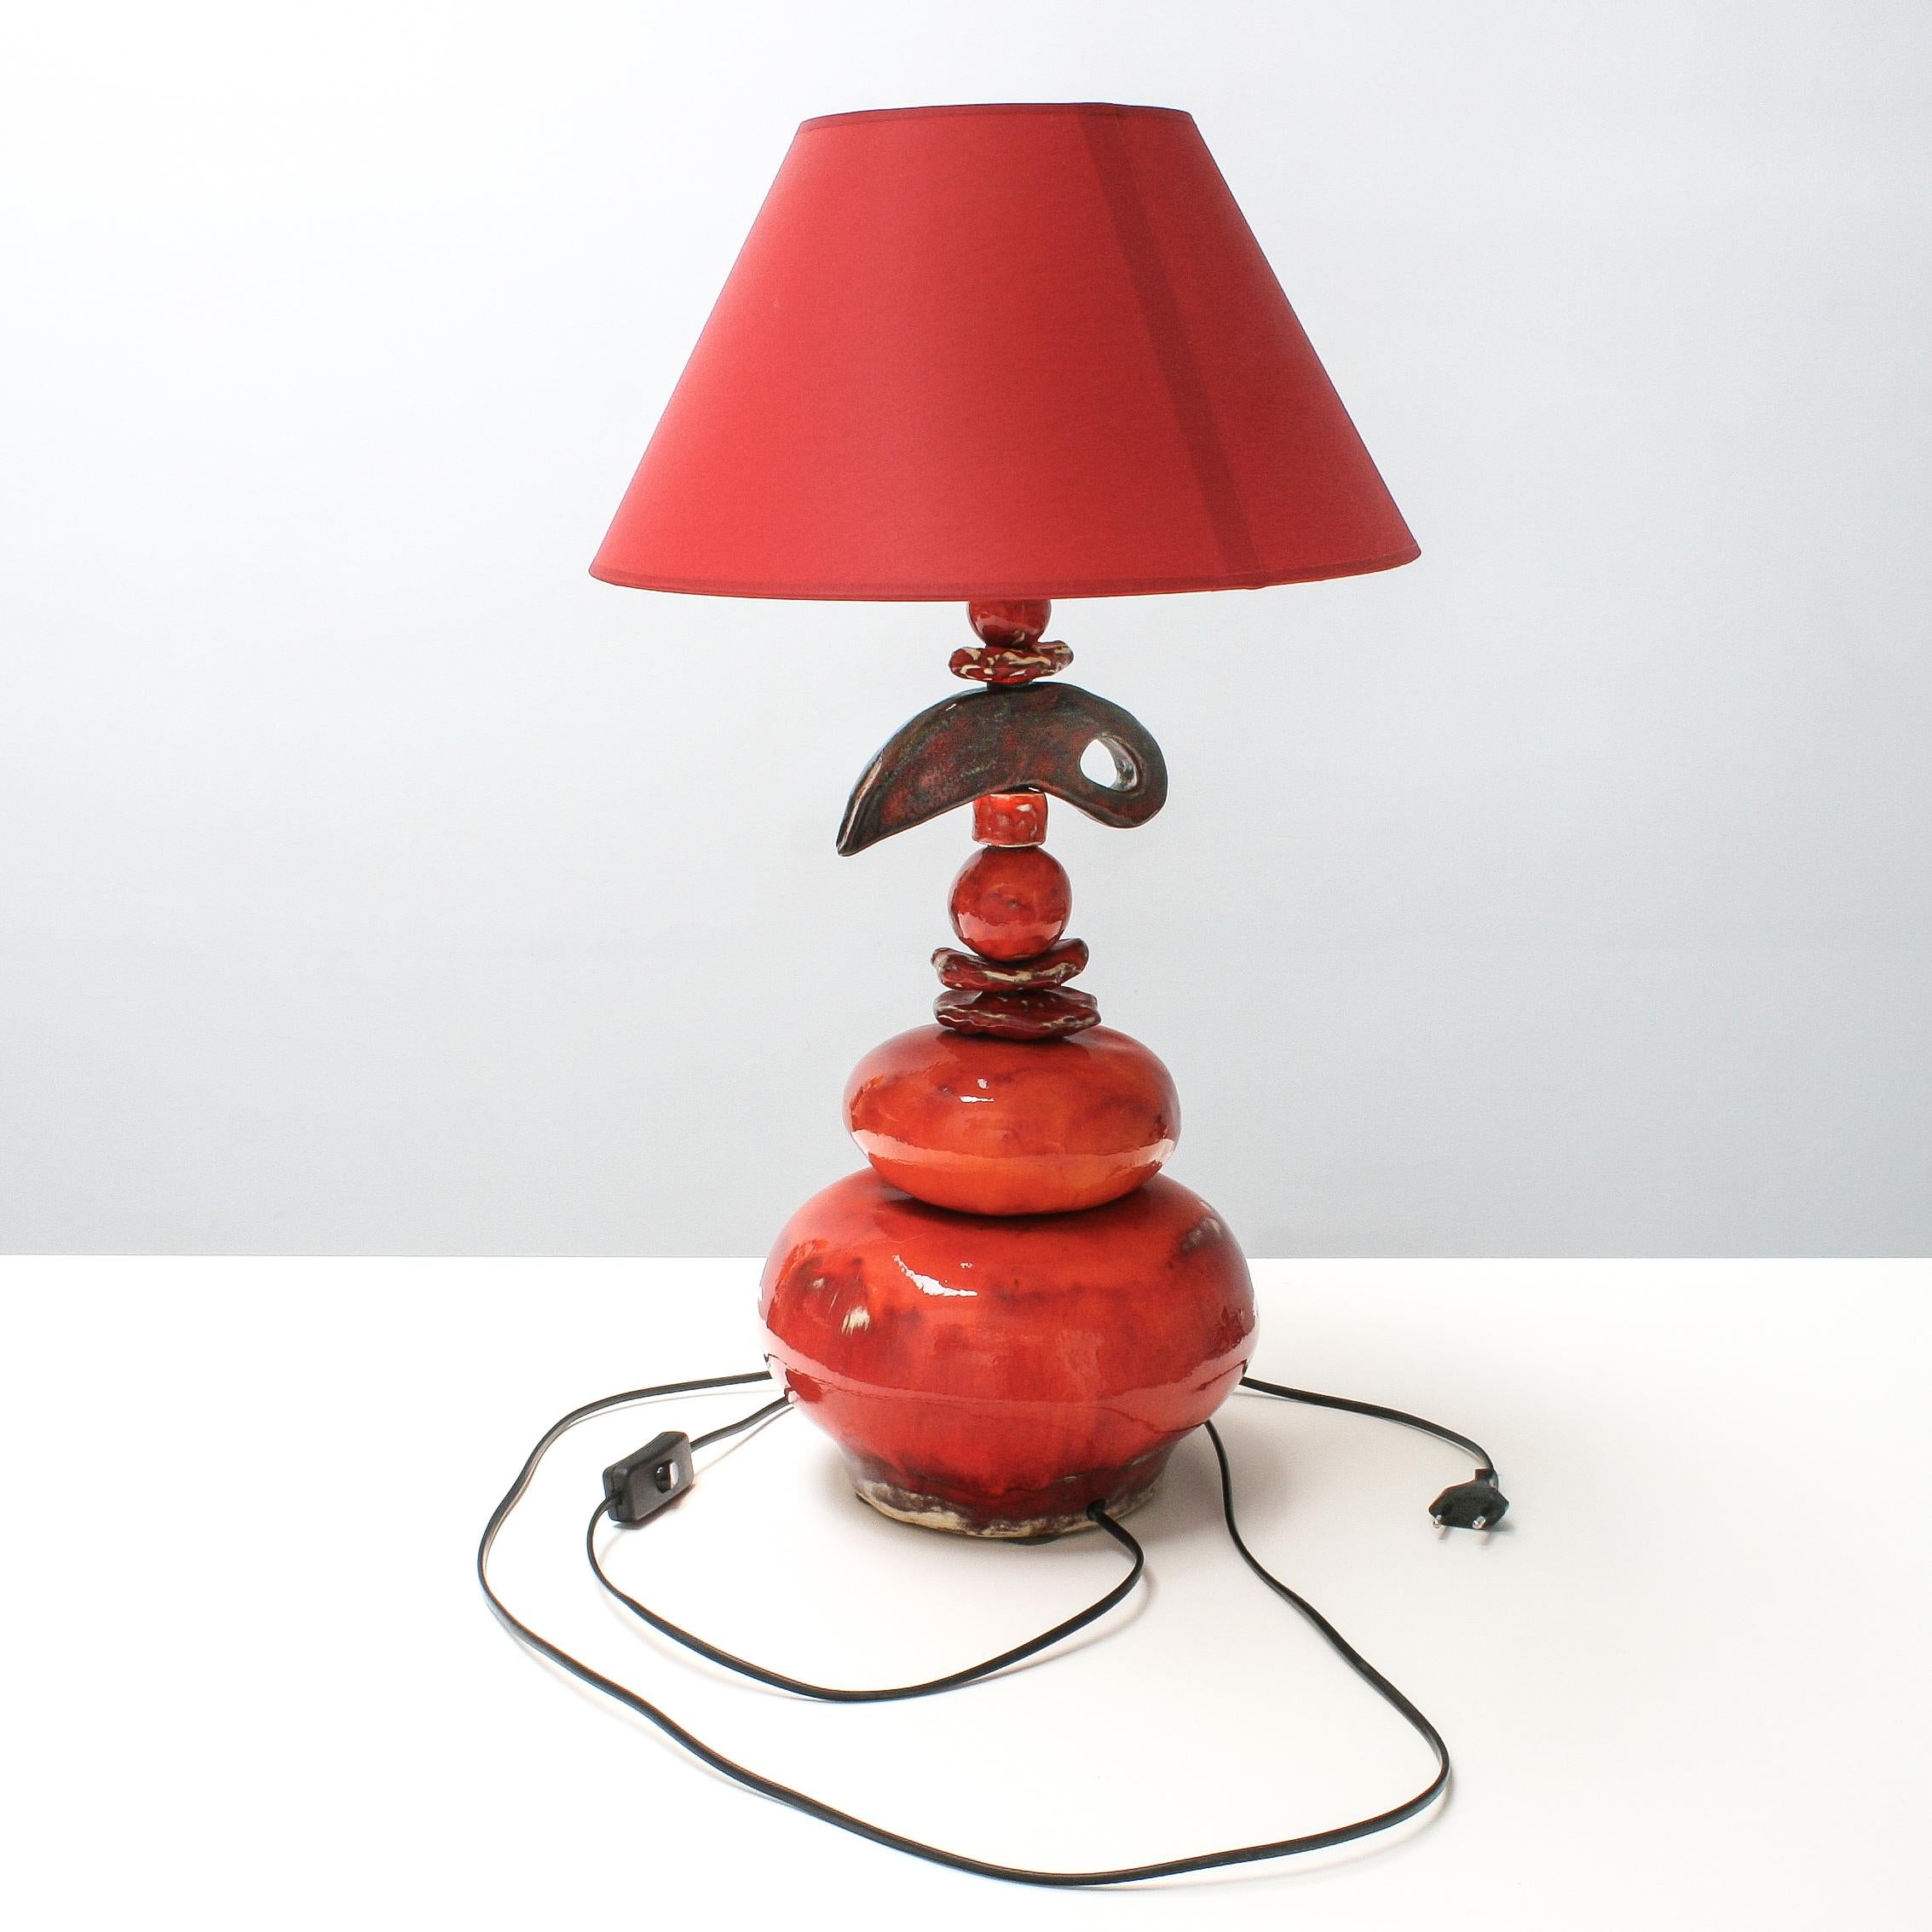 Belgian Ceramic Art Stacking Table Lamps by Greta Beuckelaere, Set of 2 In Excellent Condition For Sale In Izegem, VWV